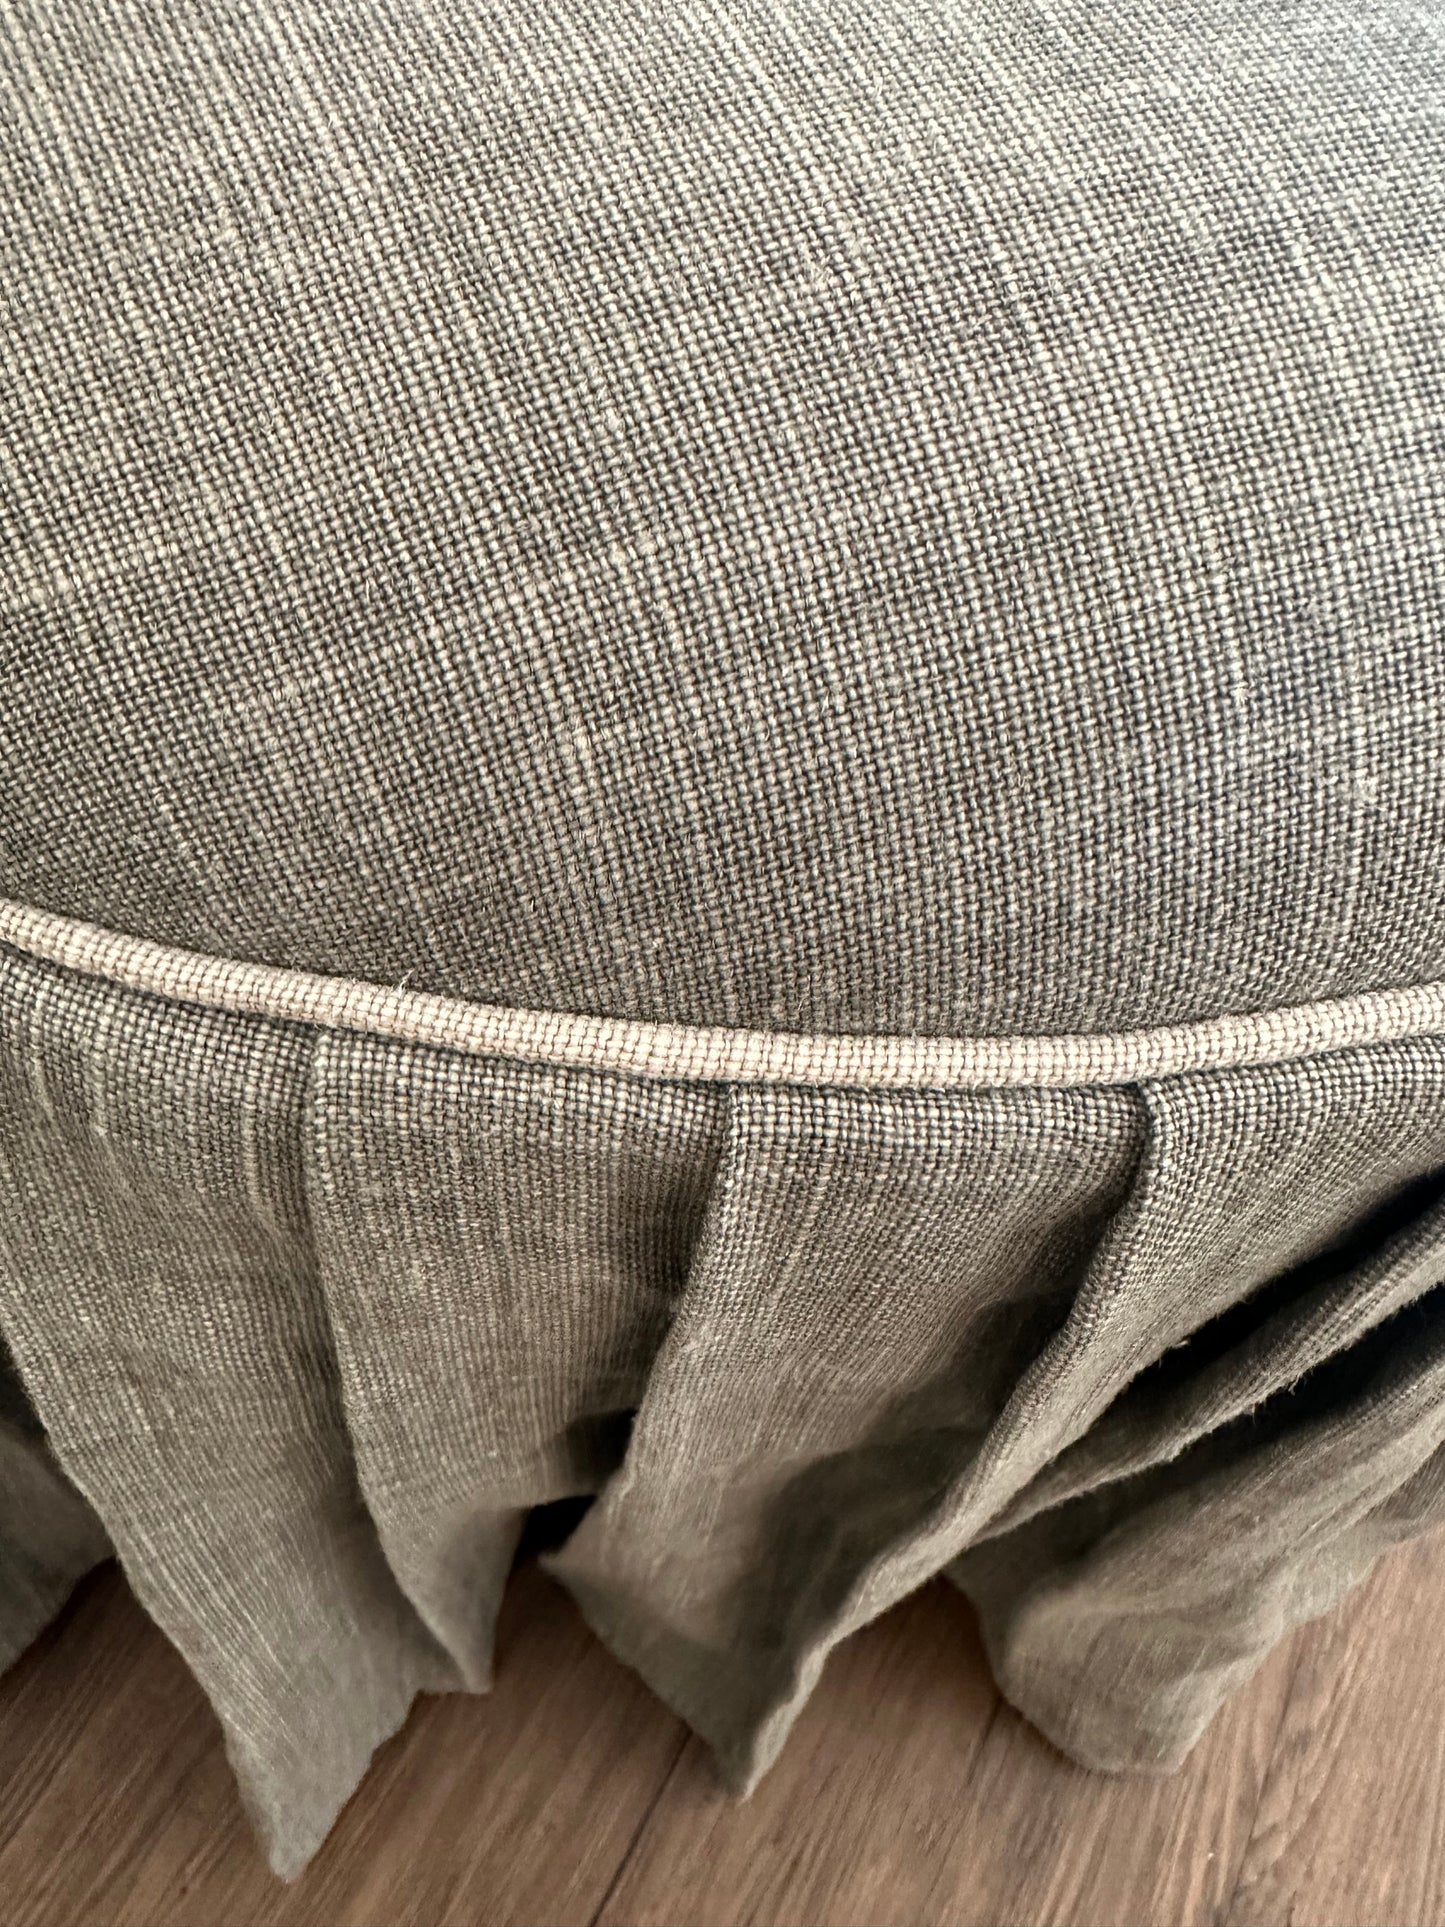 Pleated Ottoman in Gray Fabric with Silver Piping Detail